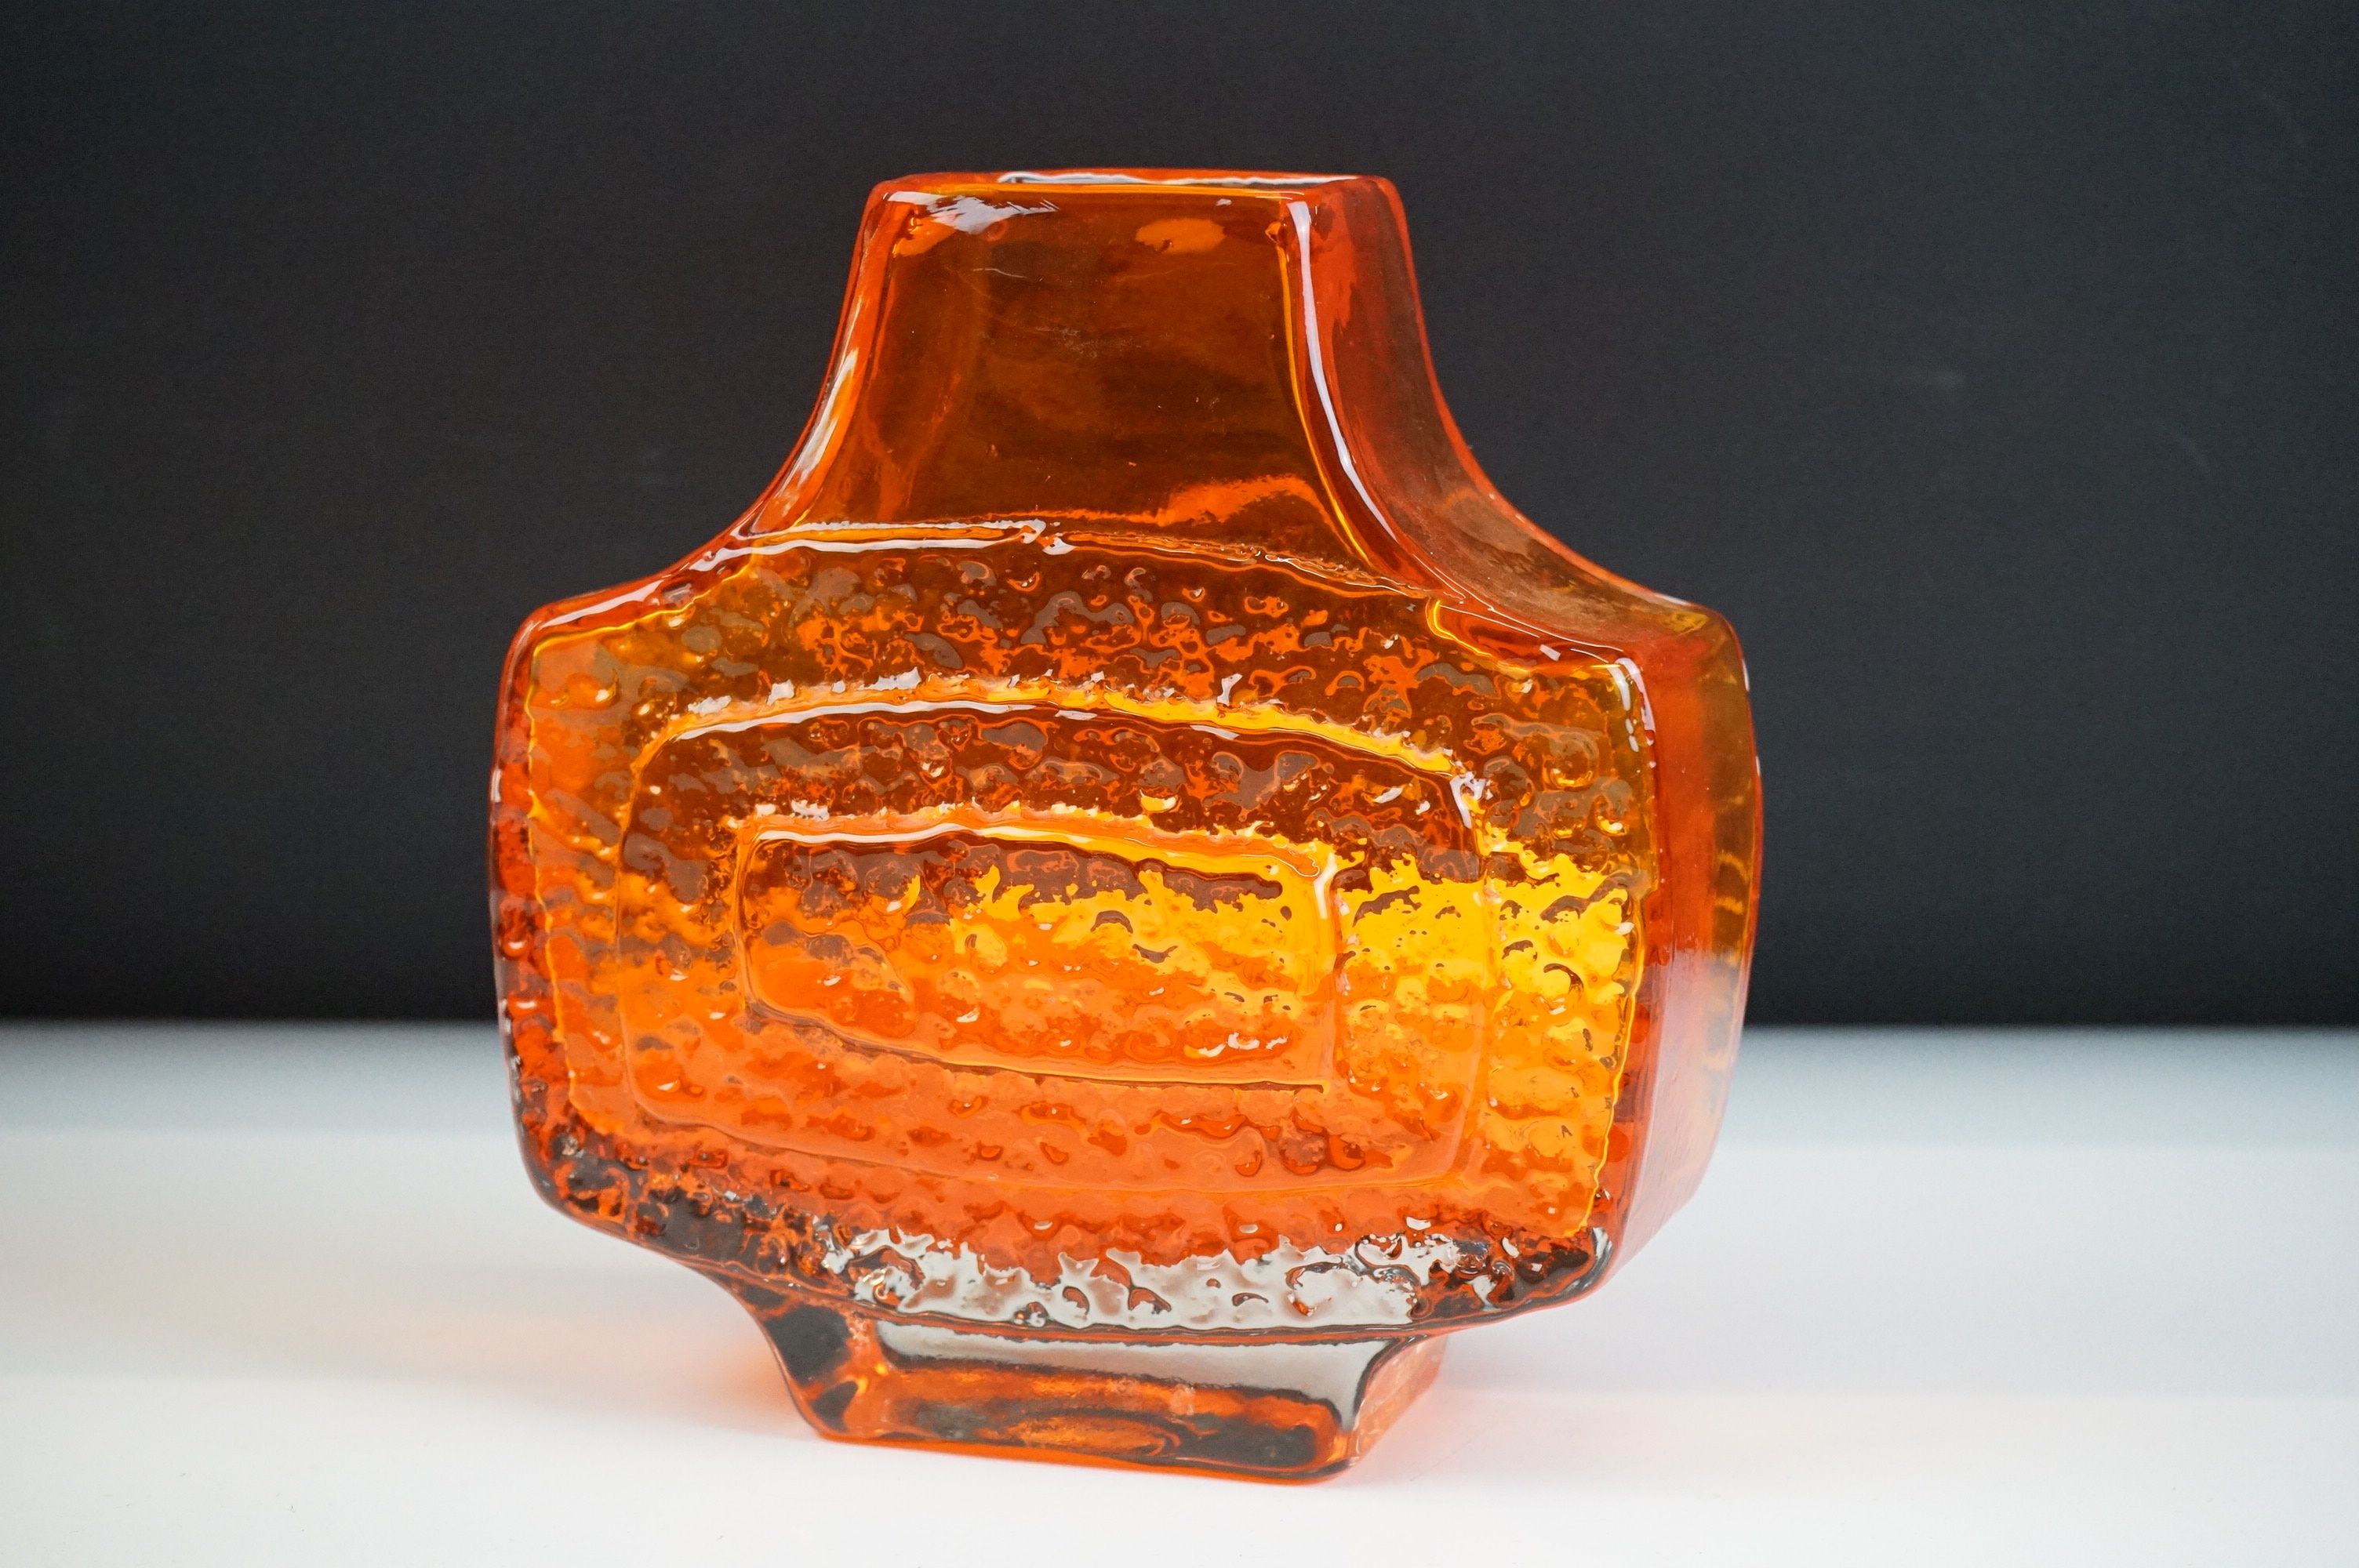 Whitefriars Textured Glass Concentric ' TV ' Pattern Vase, pattern no. 9677, in the Tangerine